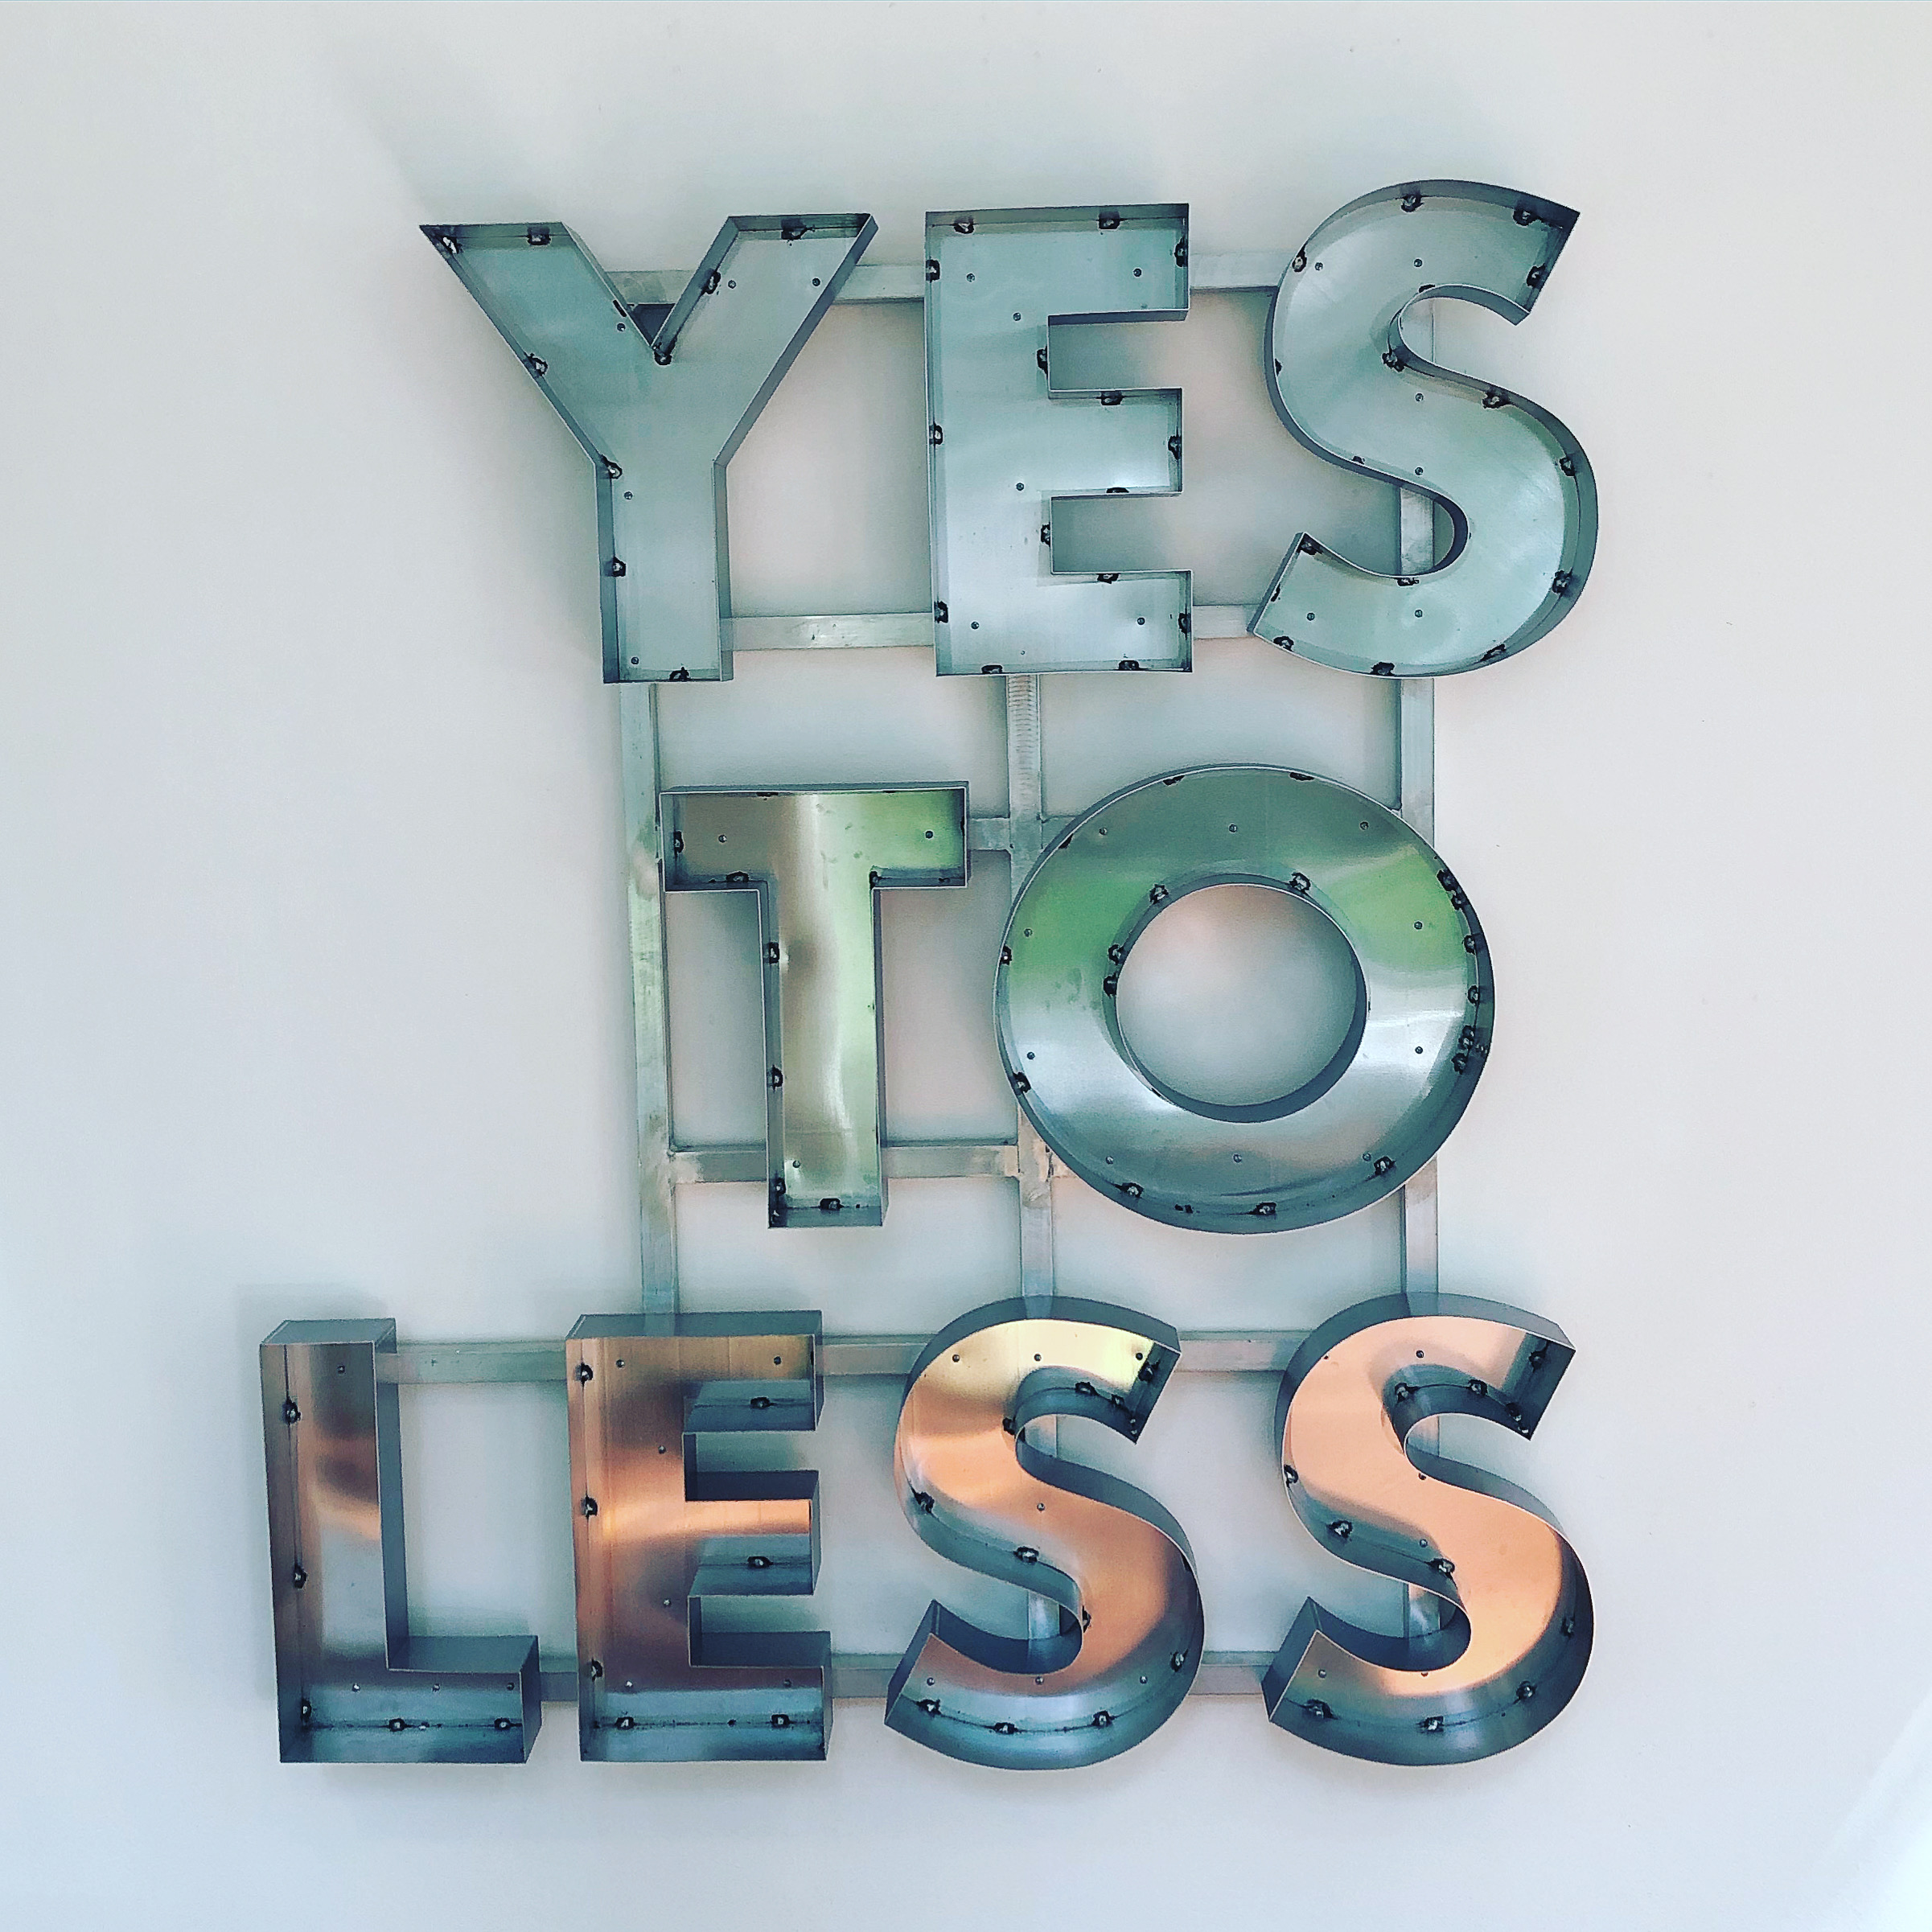 YESS TO LESS